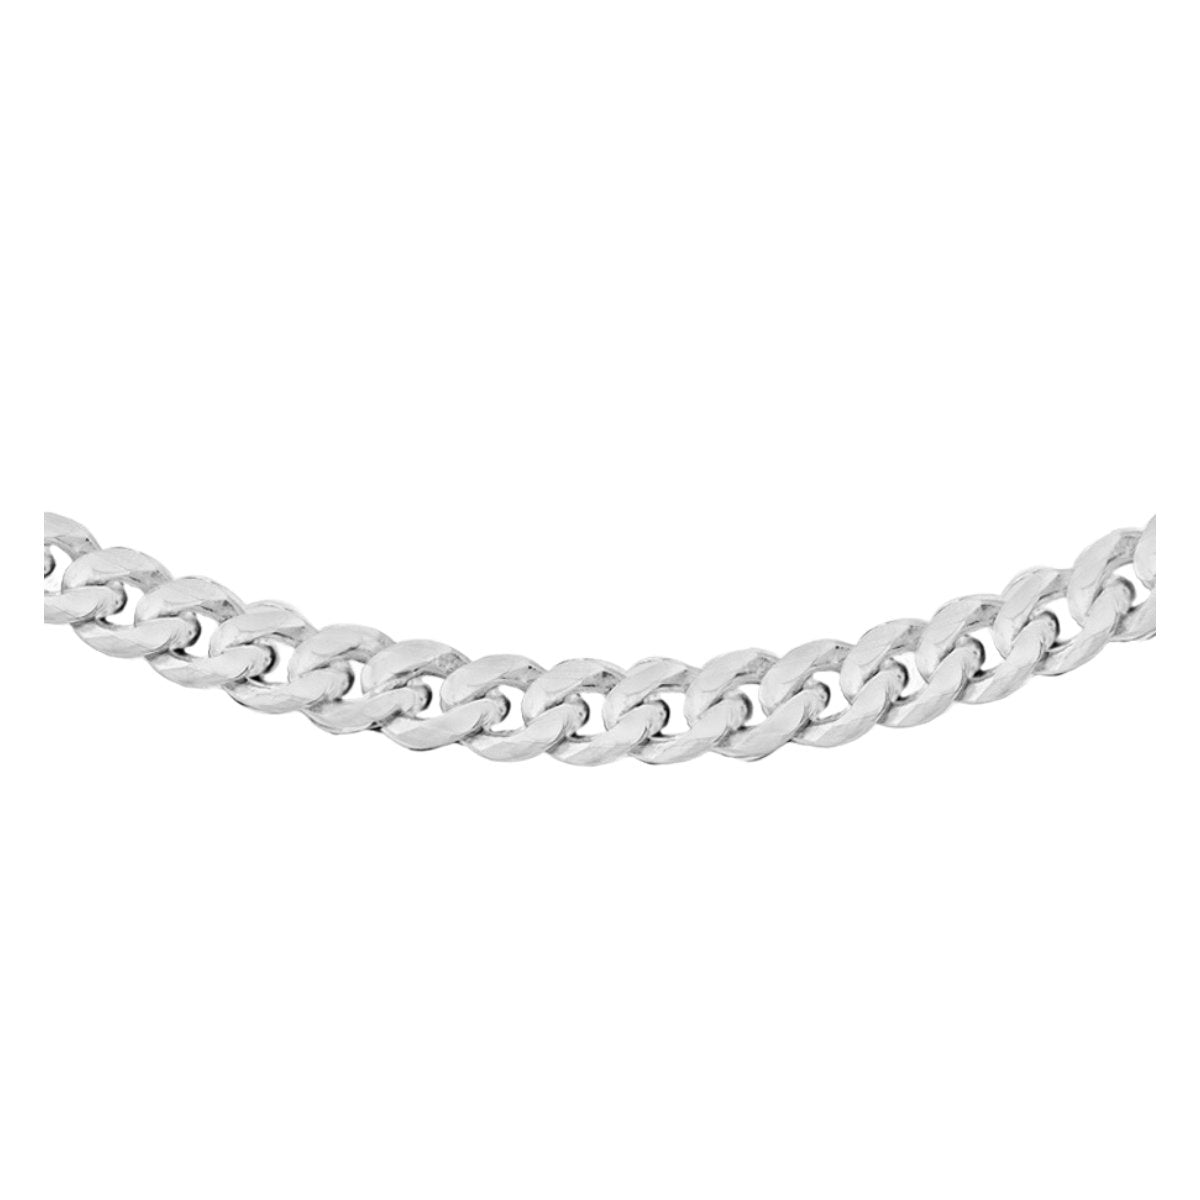 Exquisite Craftsmanship: Sterling Silver 100 Diamond Cut Curb Chain Necklace - 71cm/28" Length - 3.2mm Width - Diamond Cut Finish - RubyJade